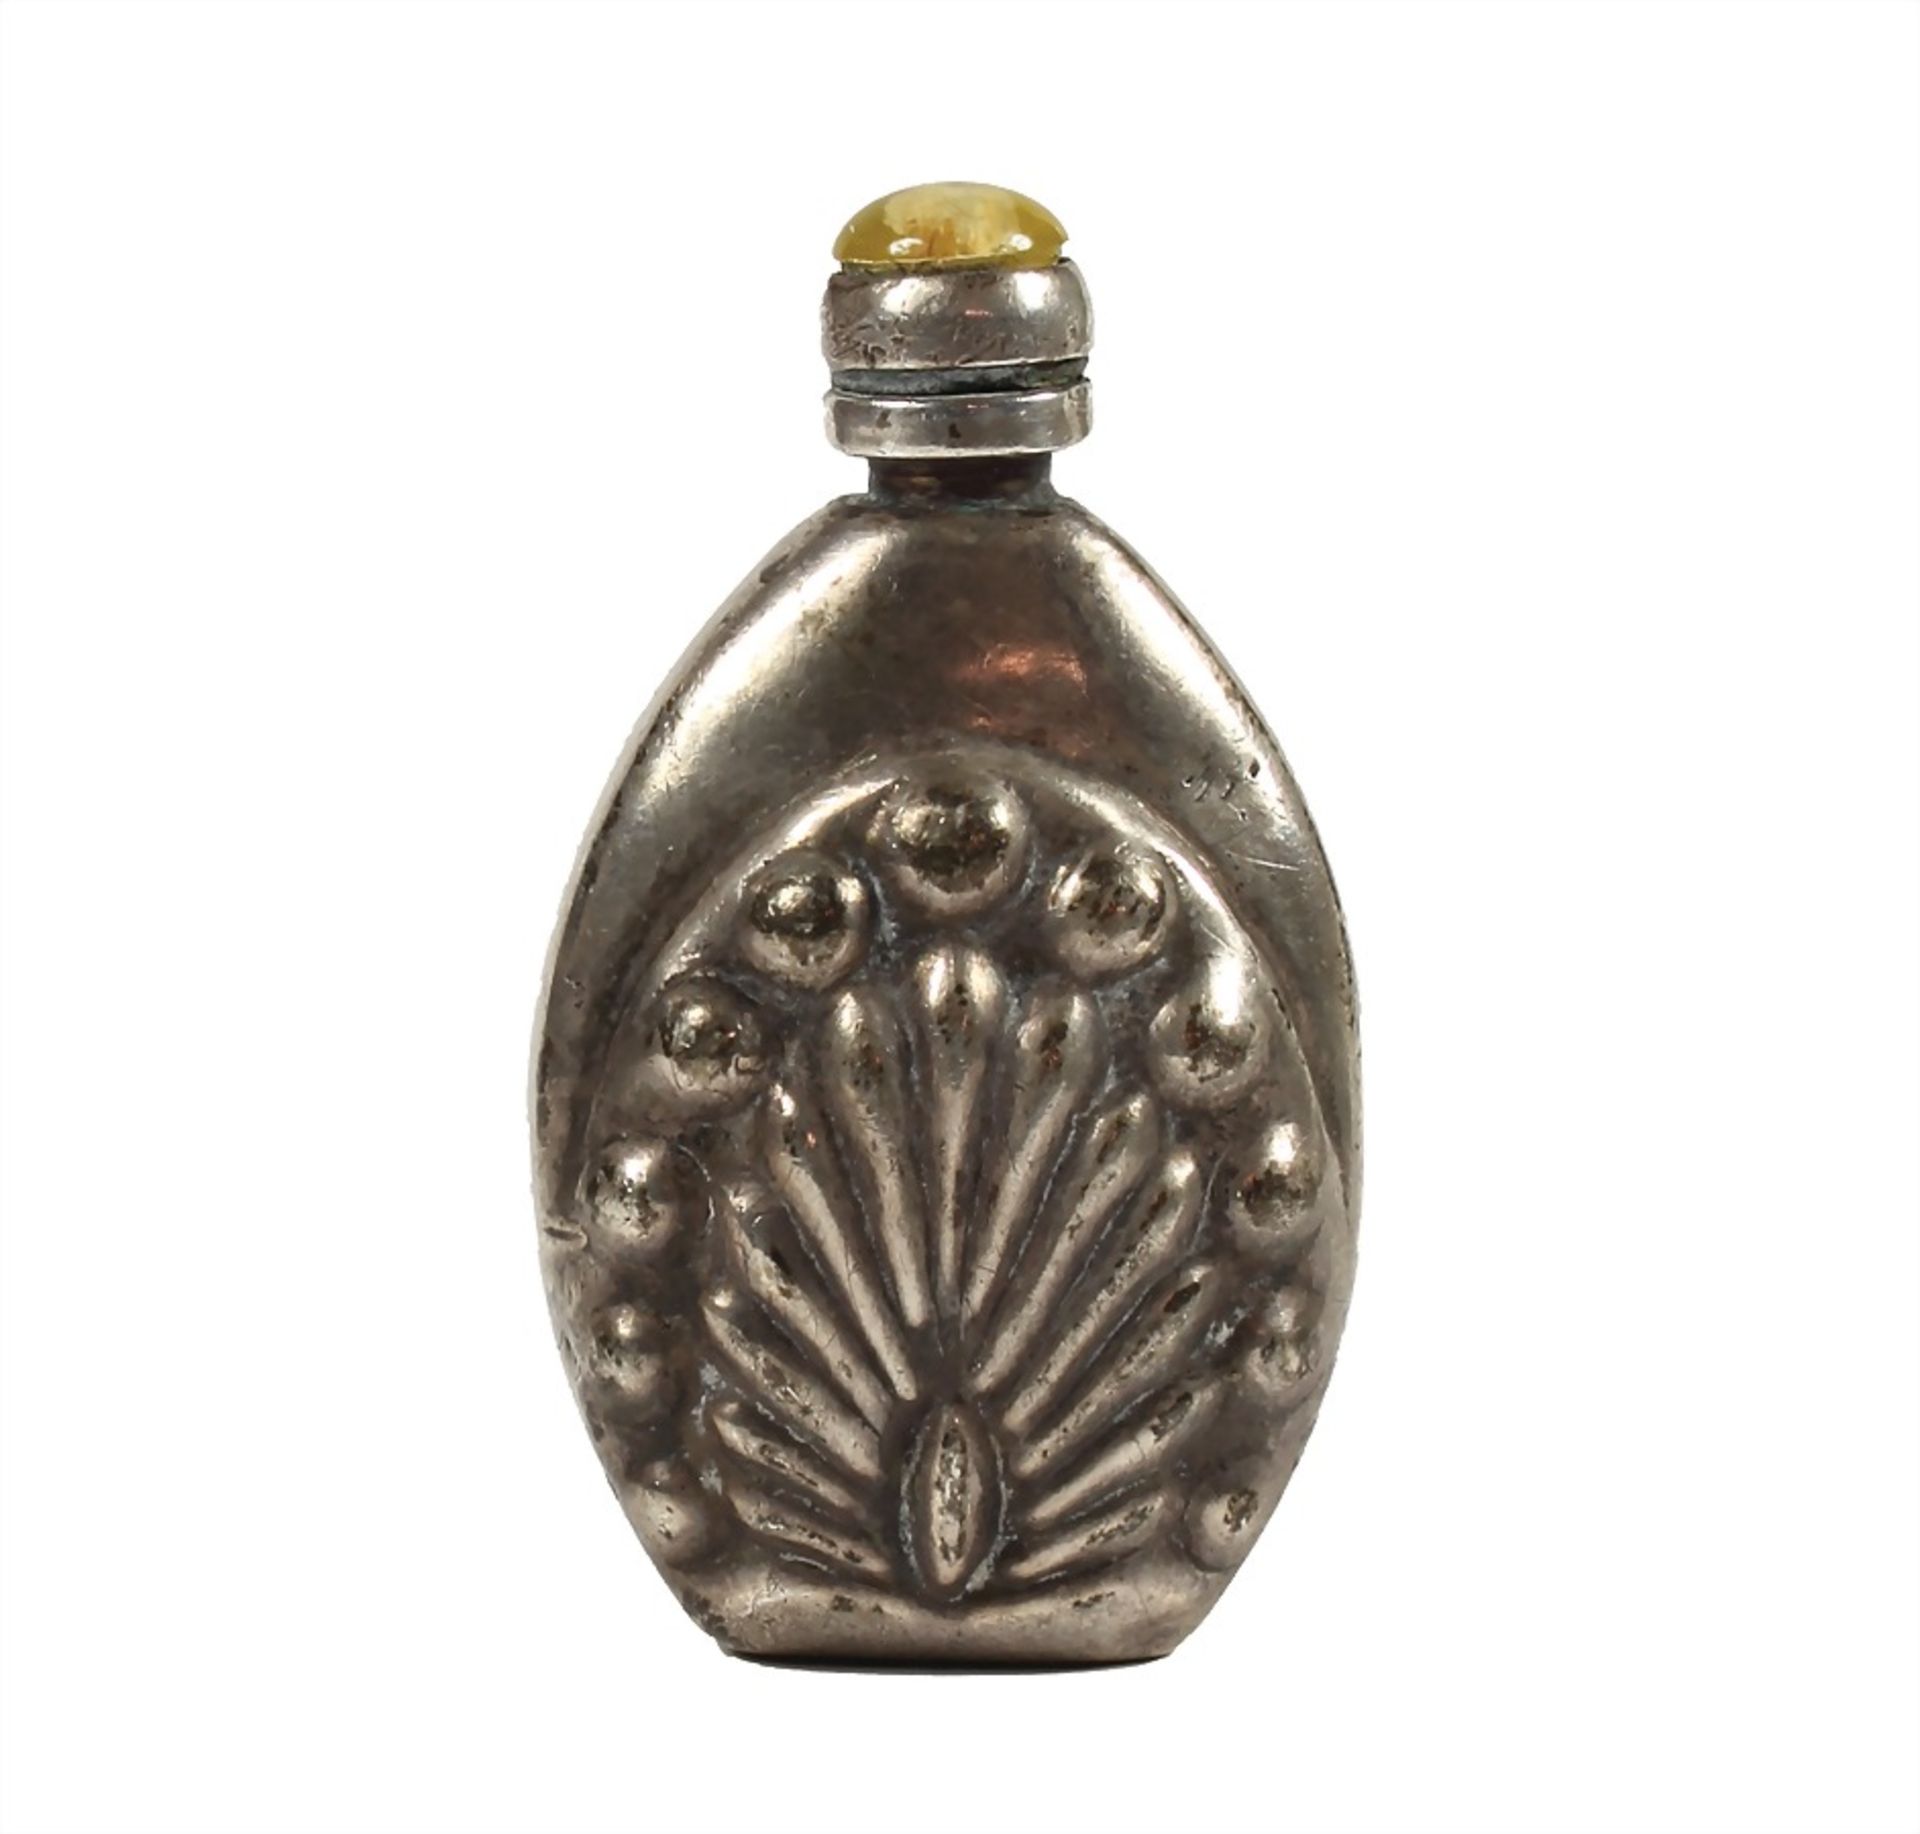 small "PARFUM-FLACON" first half of the 20th century, silver, amber, chased on both sides, screw top